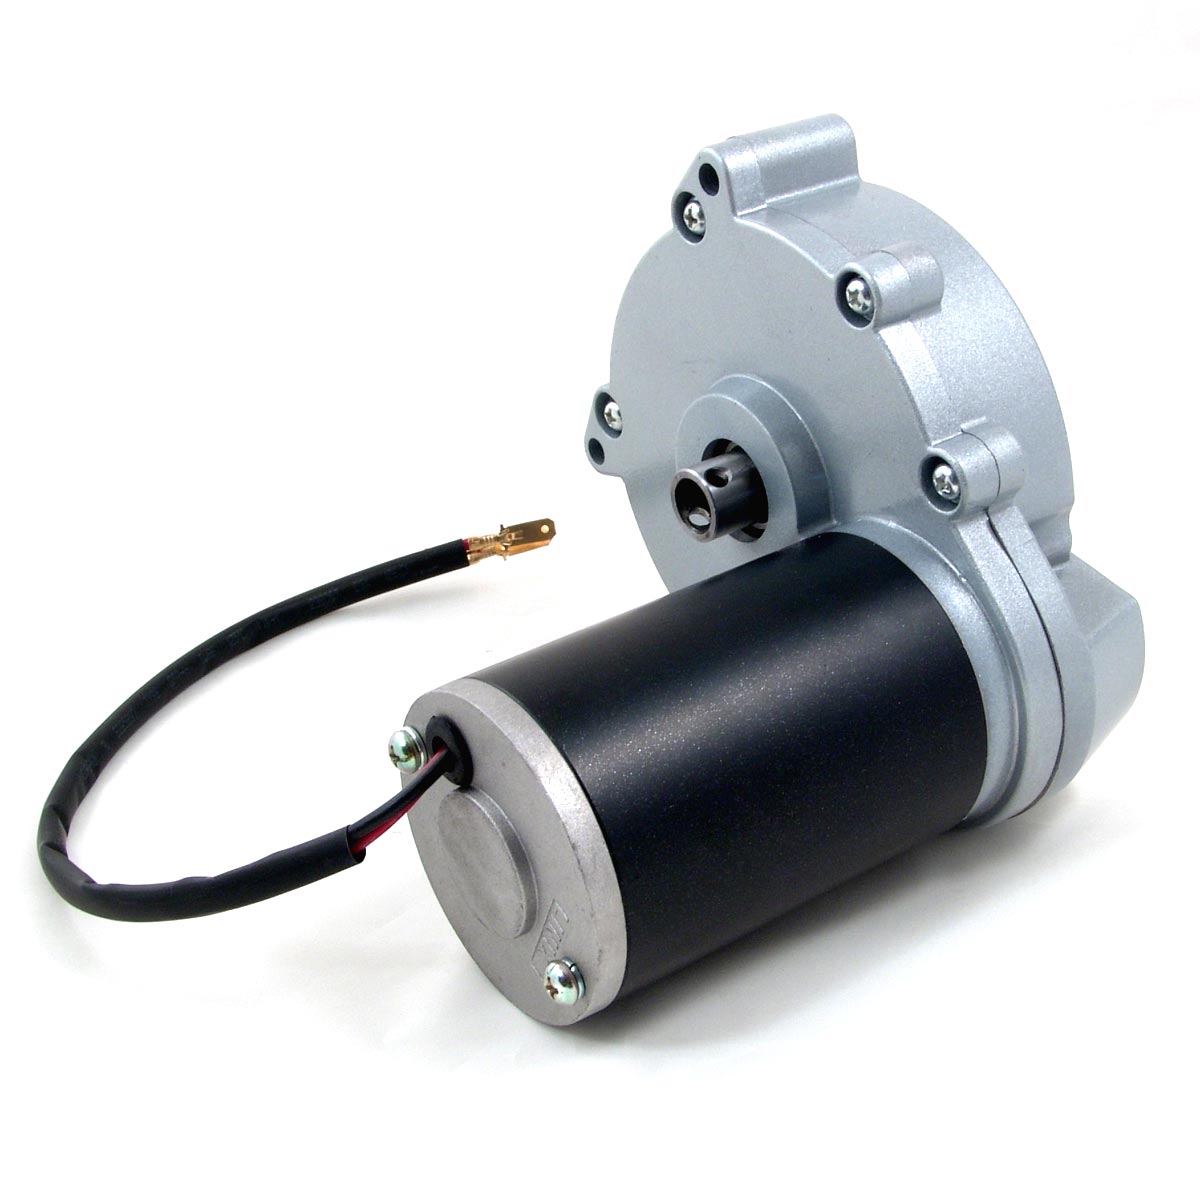 12V DC Motor with Gear Box Assembly for P1D3 – novacaddy